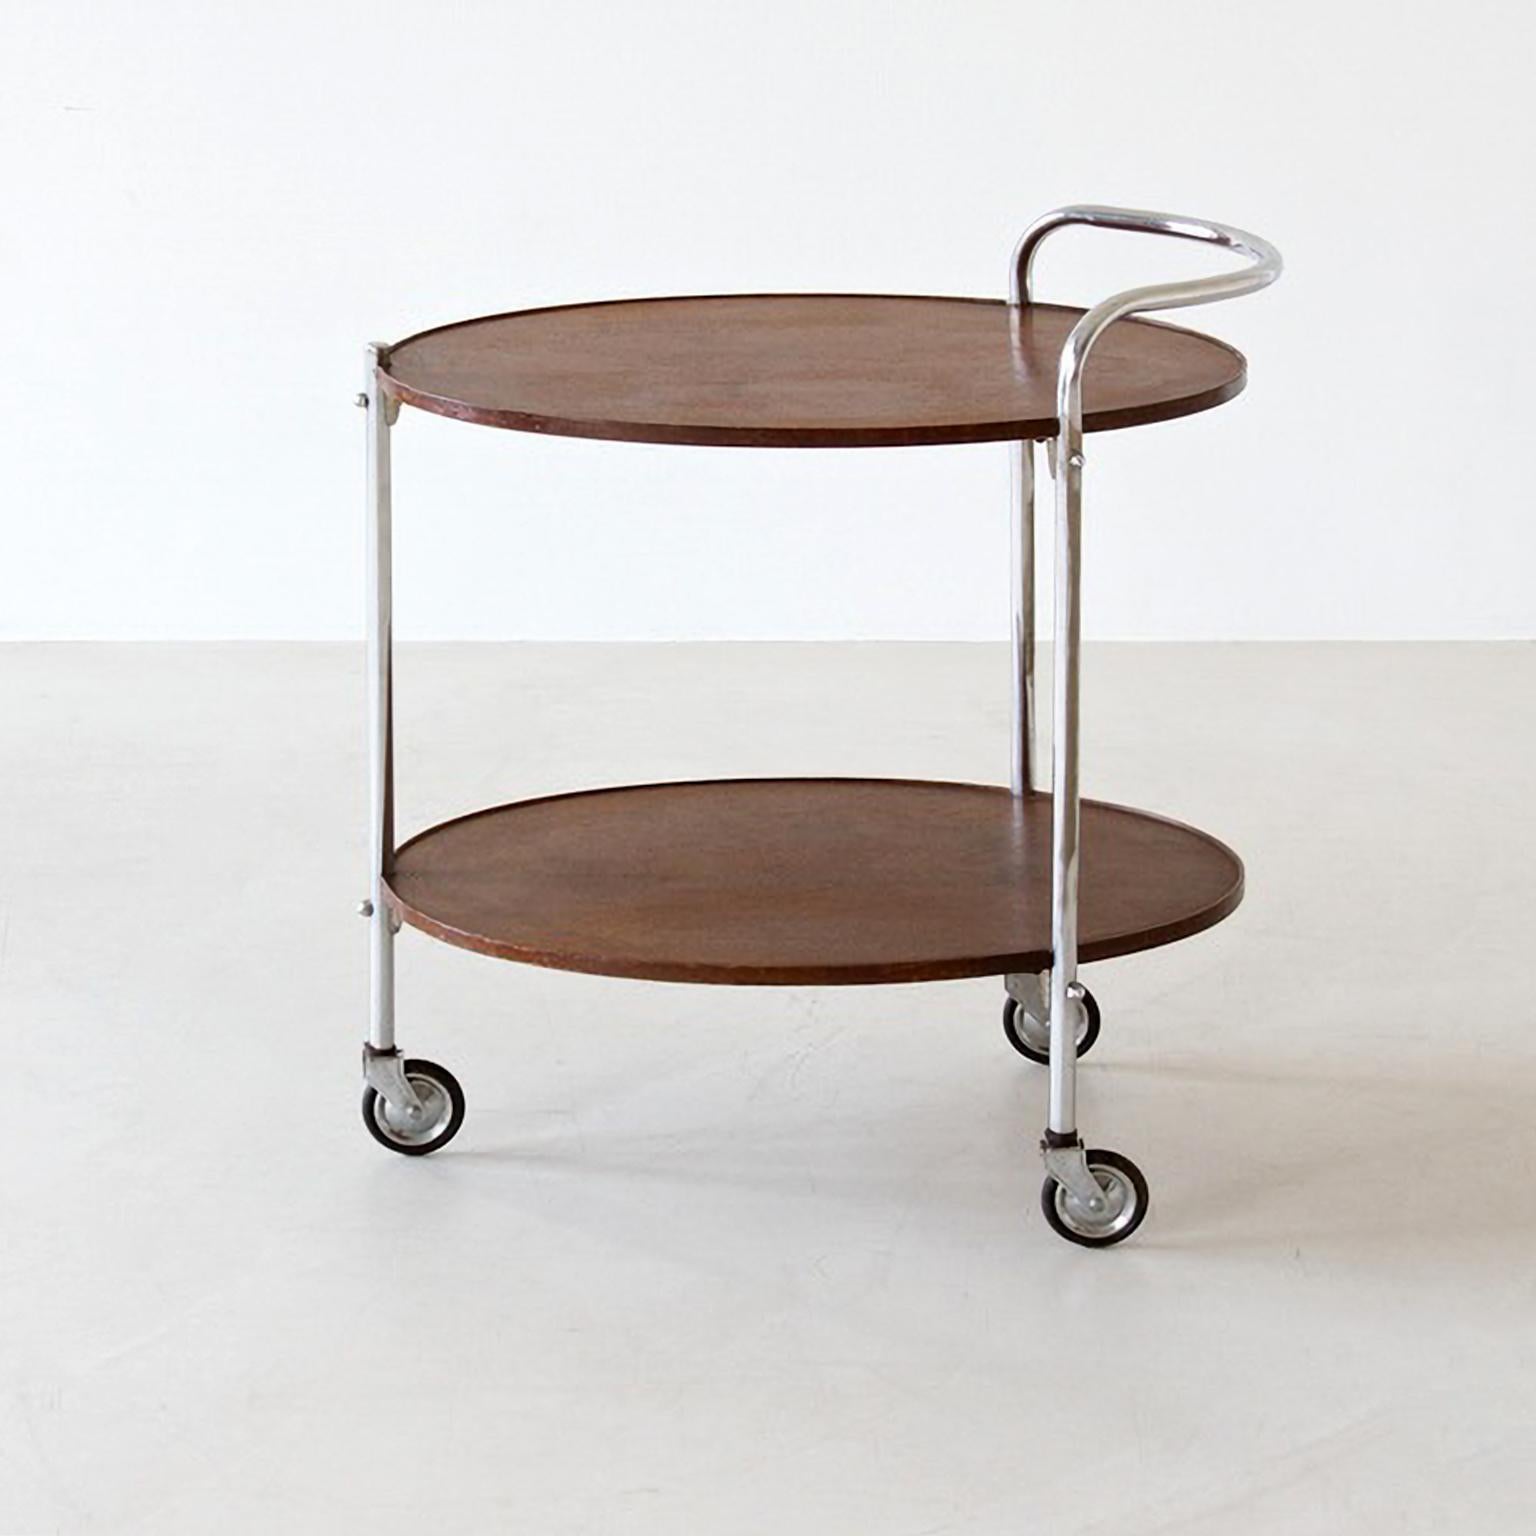 German Modernist Serving Trolley with Two Oval Wooden Shelves Chromed Metal, circa 1930 For Sale